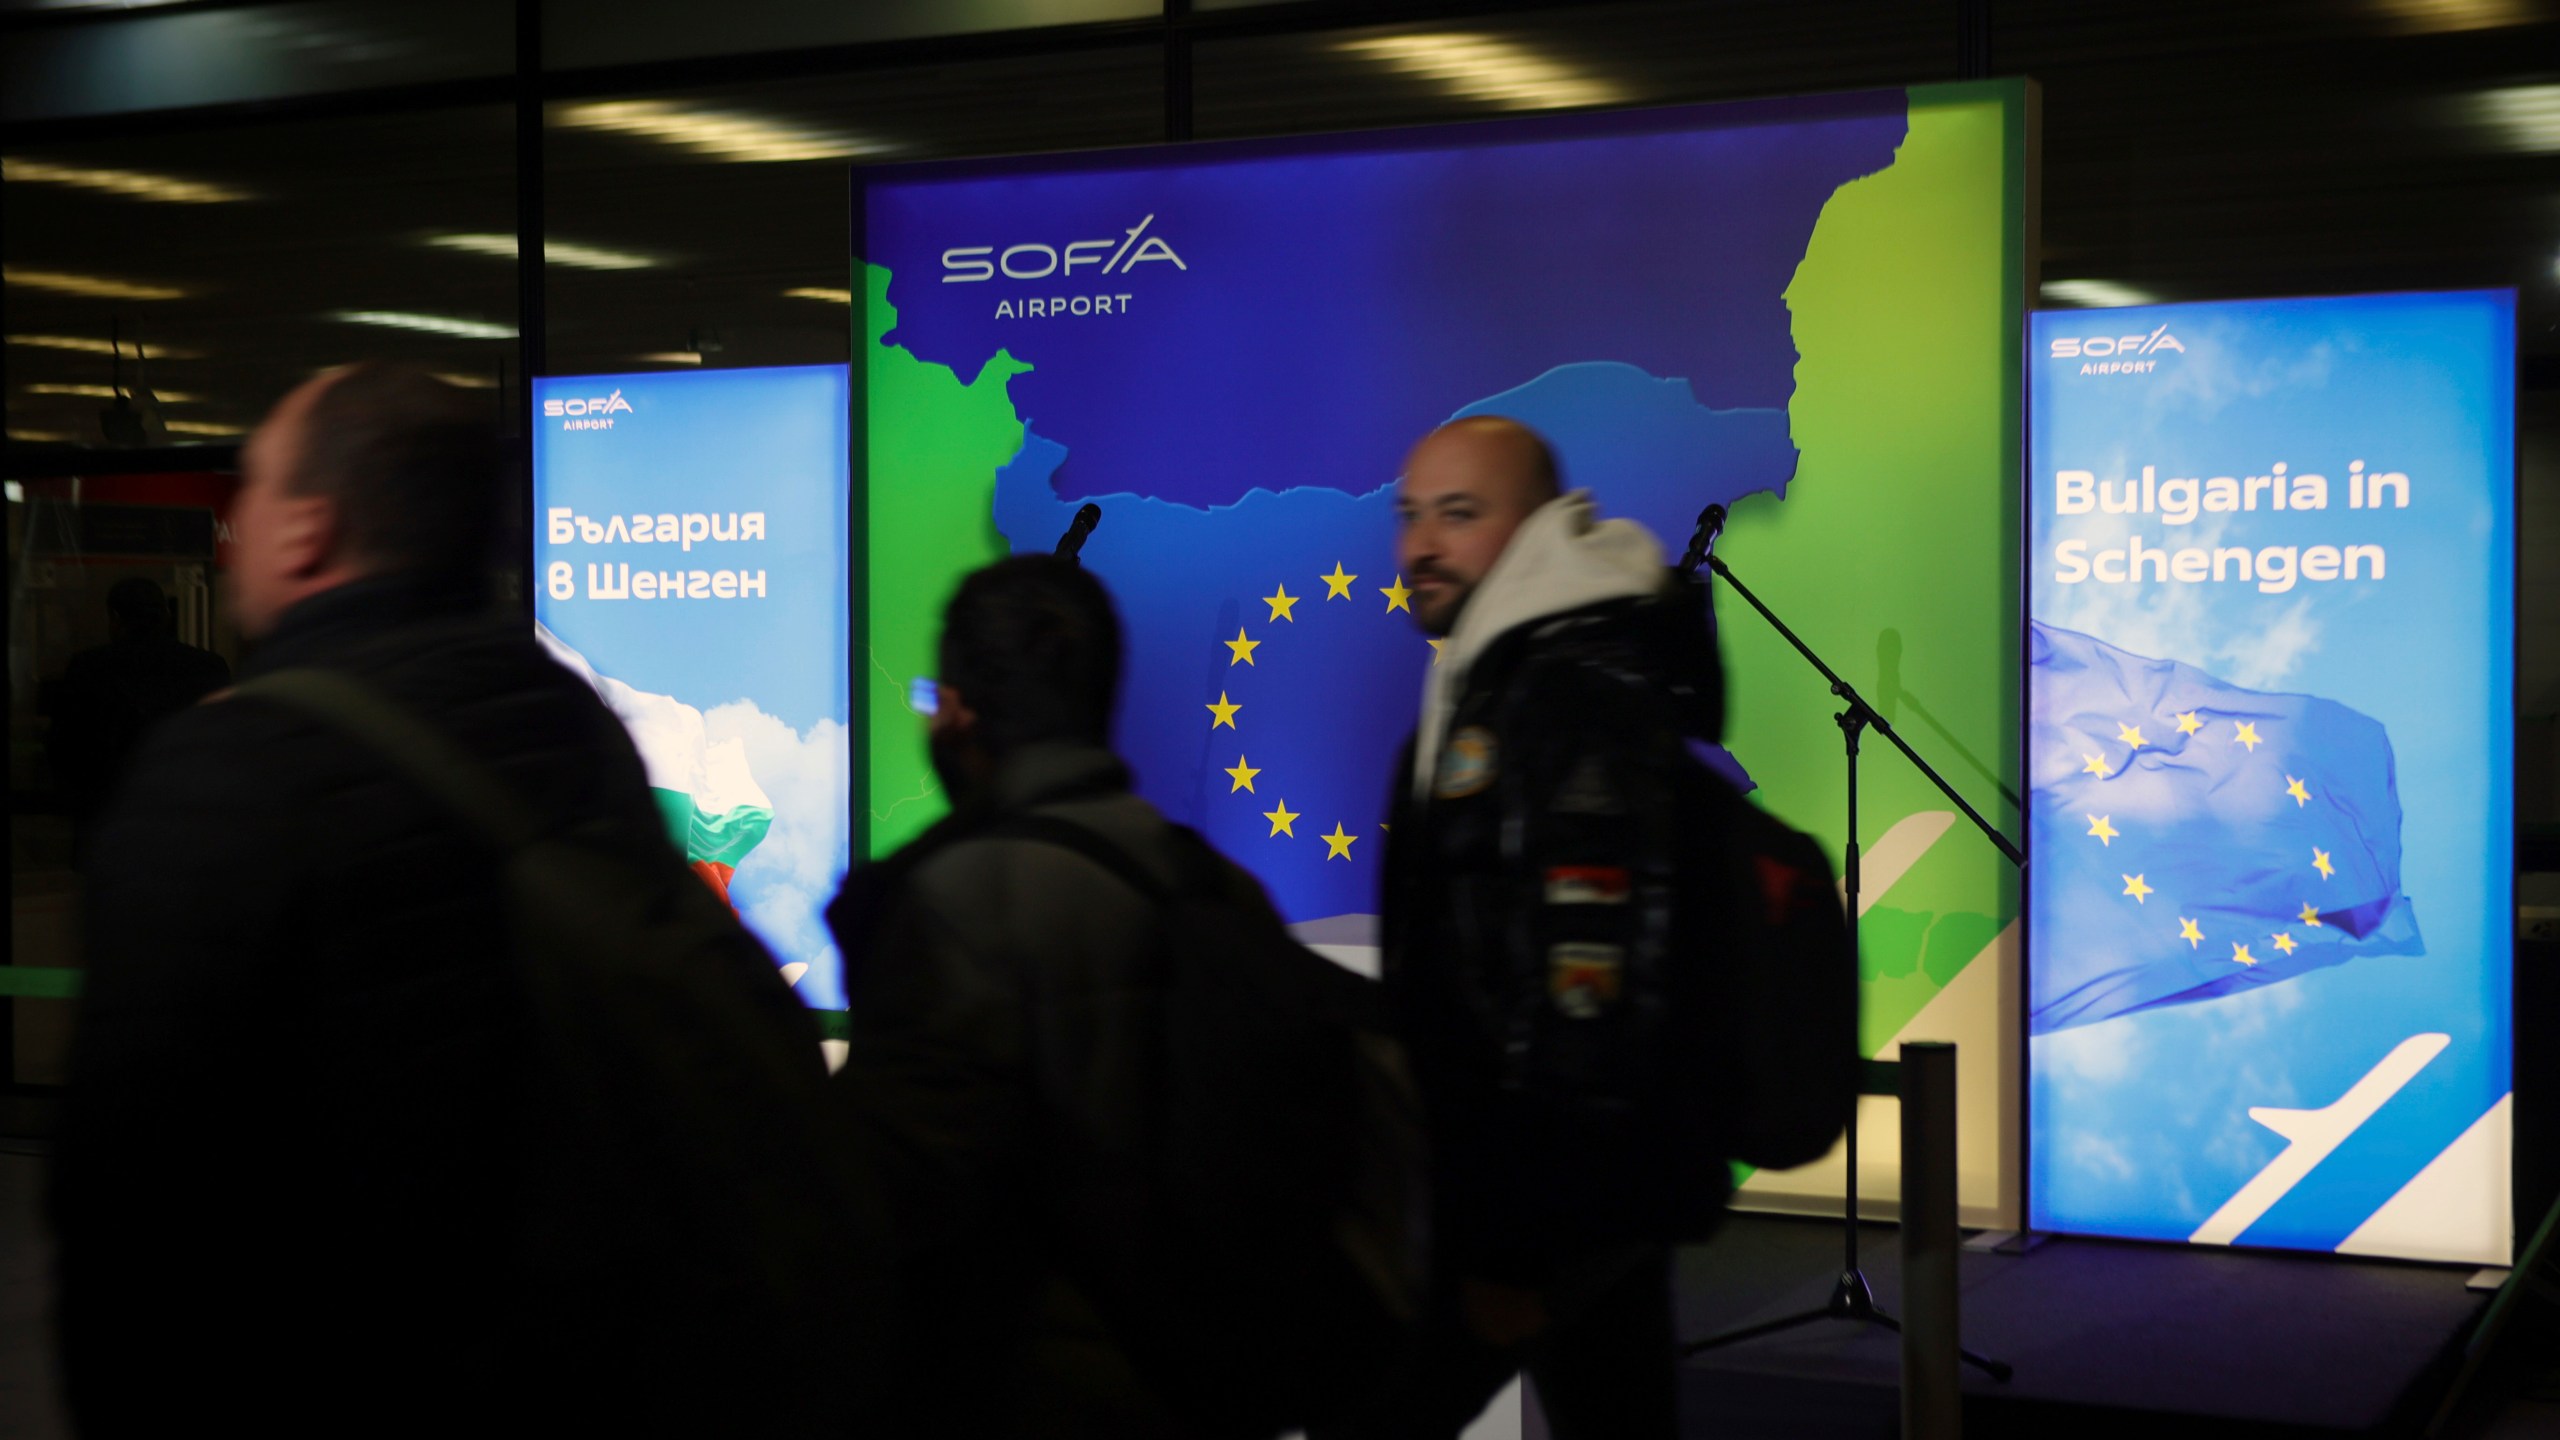 Passengers pass posters announcing Bulgarias' accession in Schengen by air and water, at Sofia airport, Bulgaria, Sunday, March 31, 2024. Romania and Bulgaria partially joined Europe's ID-check-free travel zone on Sunday, marking a new step in the two countries' integration with the European Union. AP Photo/Valentina Petrova)